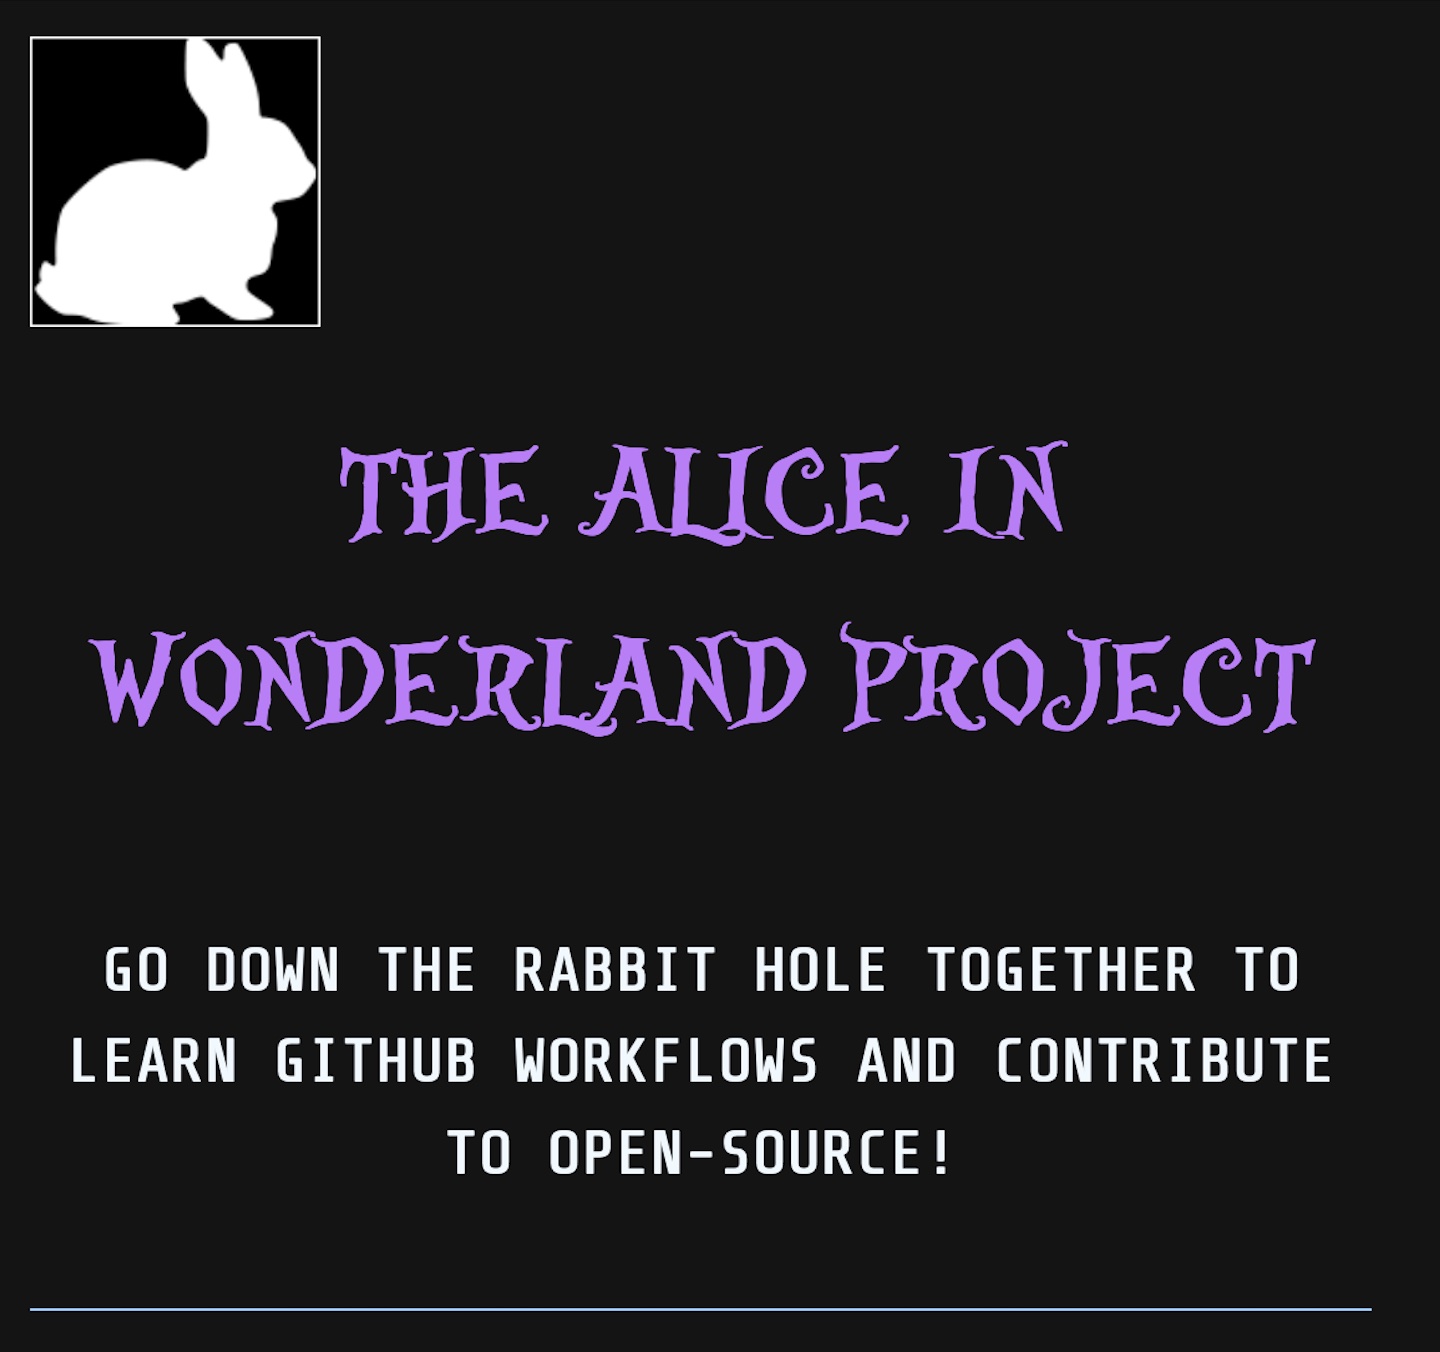 'website screenshot with a black background. white rabbit icon. In purple fantasy style text: The Alice in Wonderland Project. In white computer text: Go down the rabbit hole together to learn GitHub workflows and contribute to open-source!'
